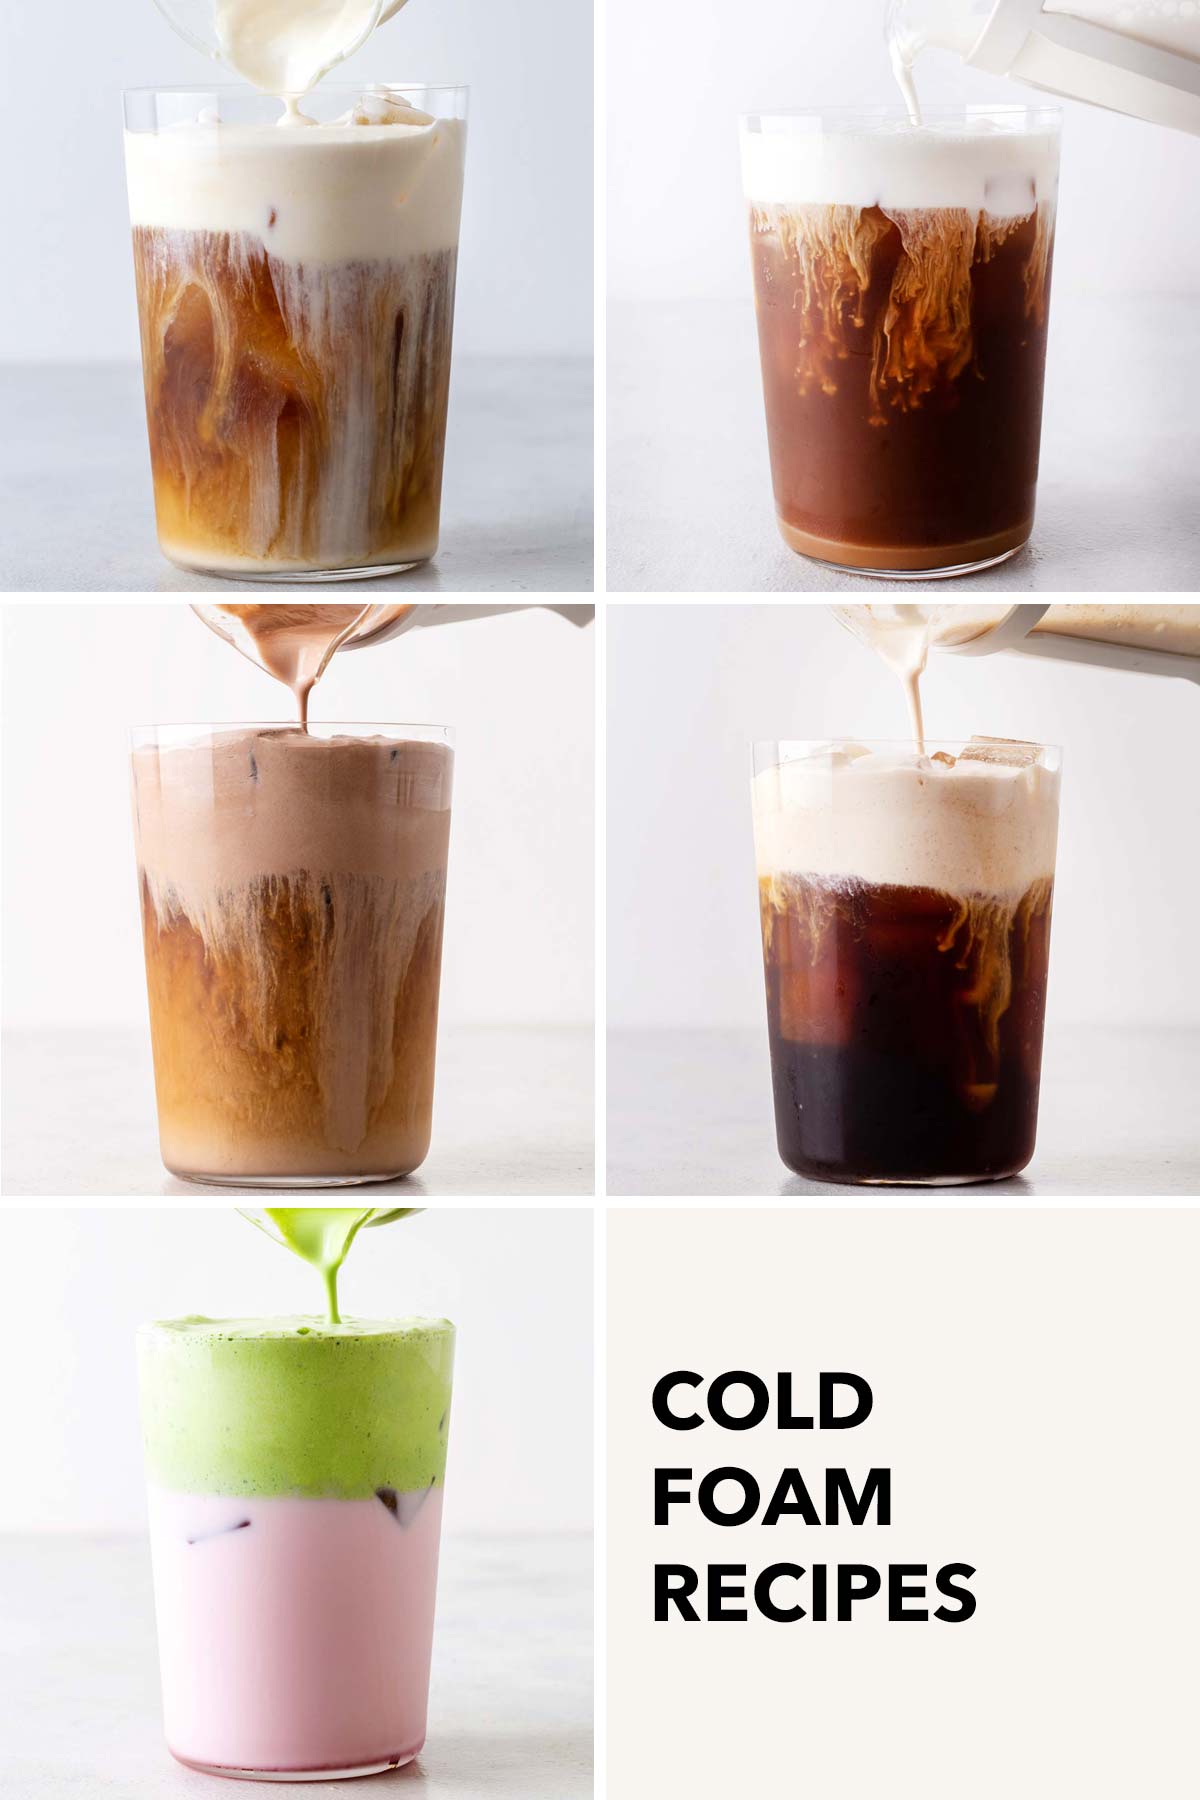 Photo grid showing 5 cold foam drinks.